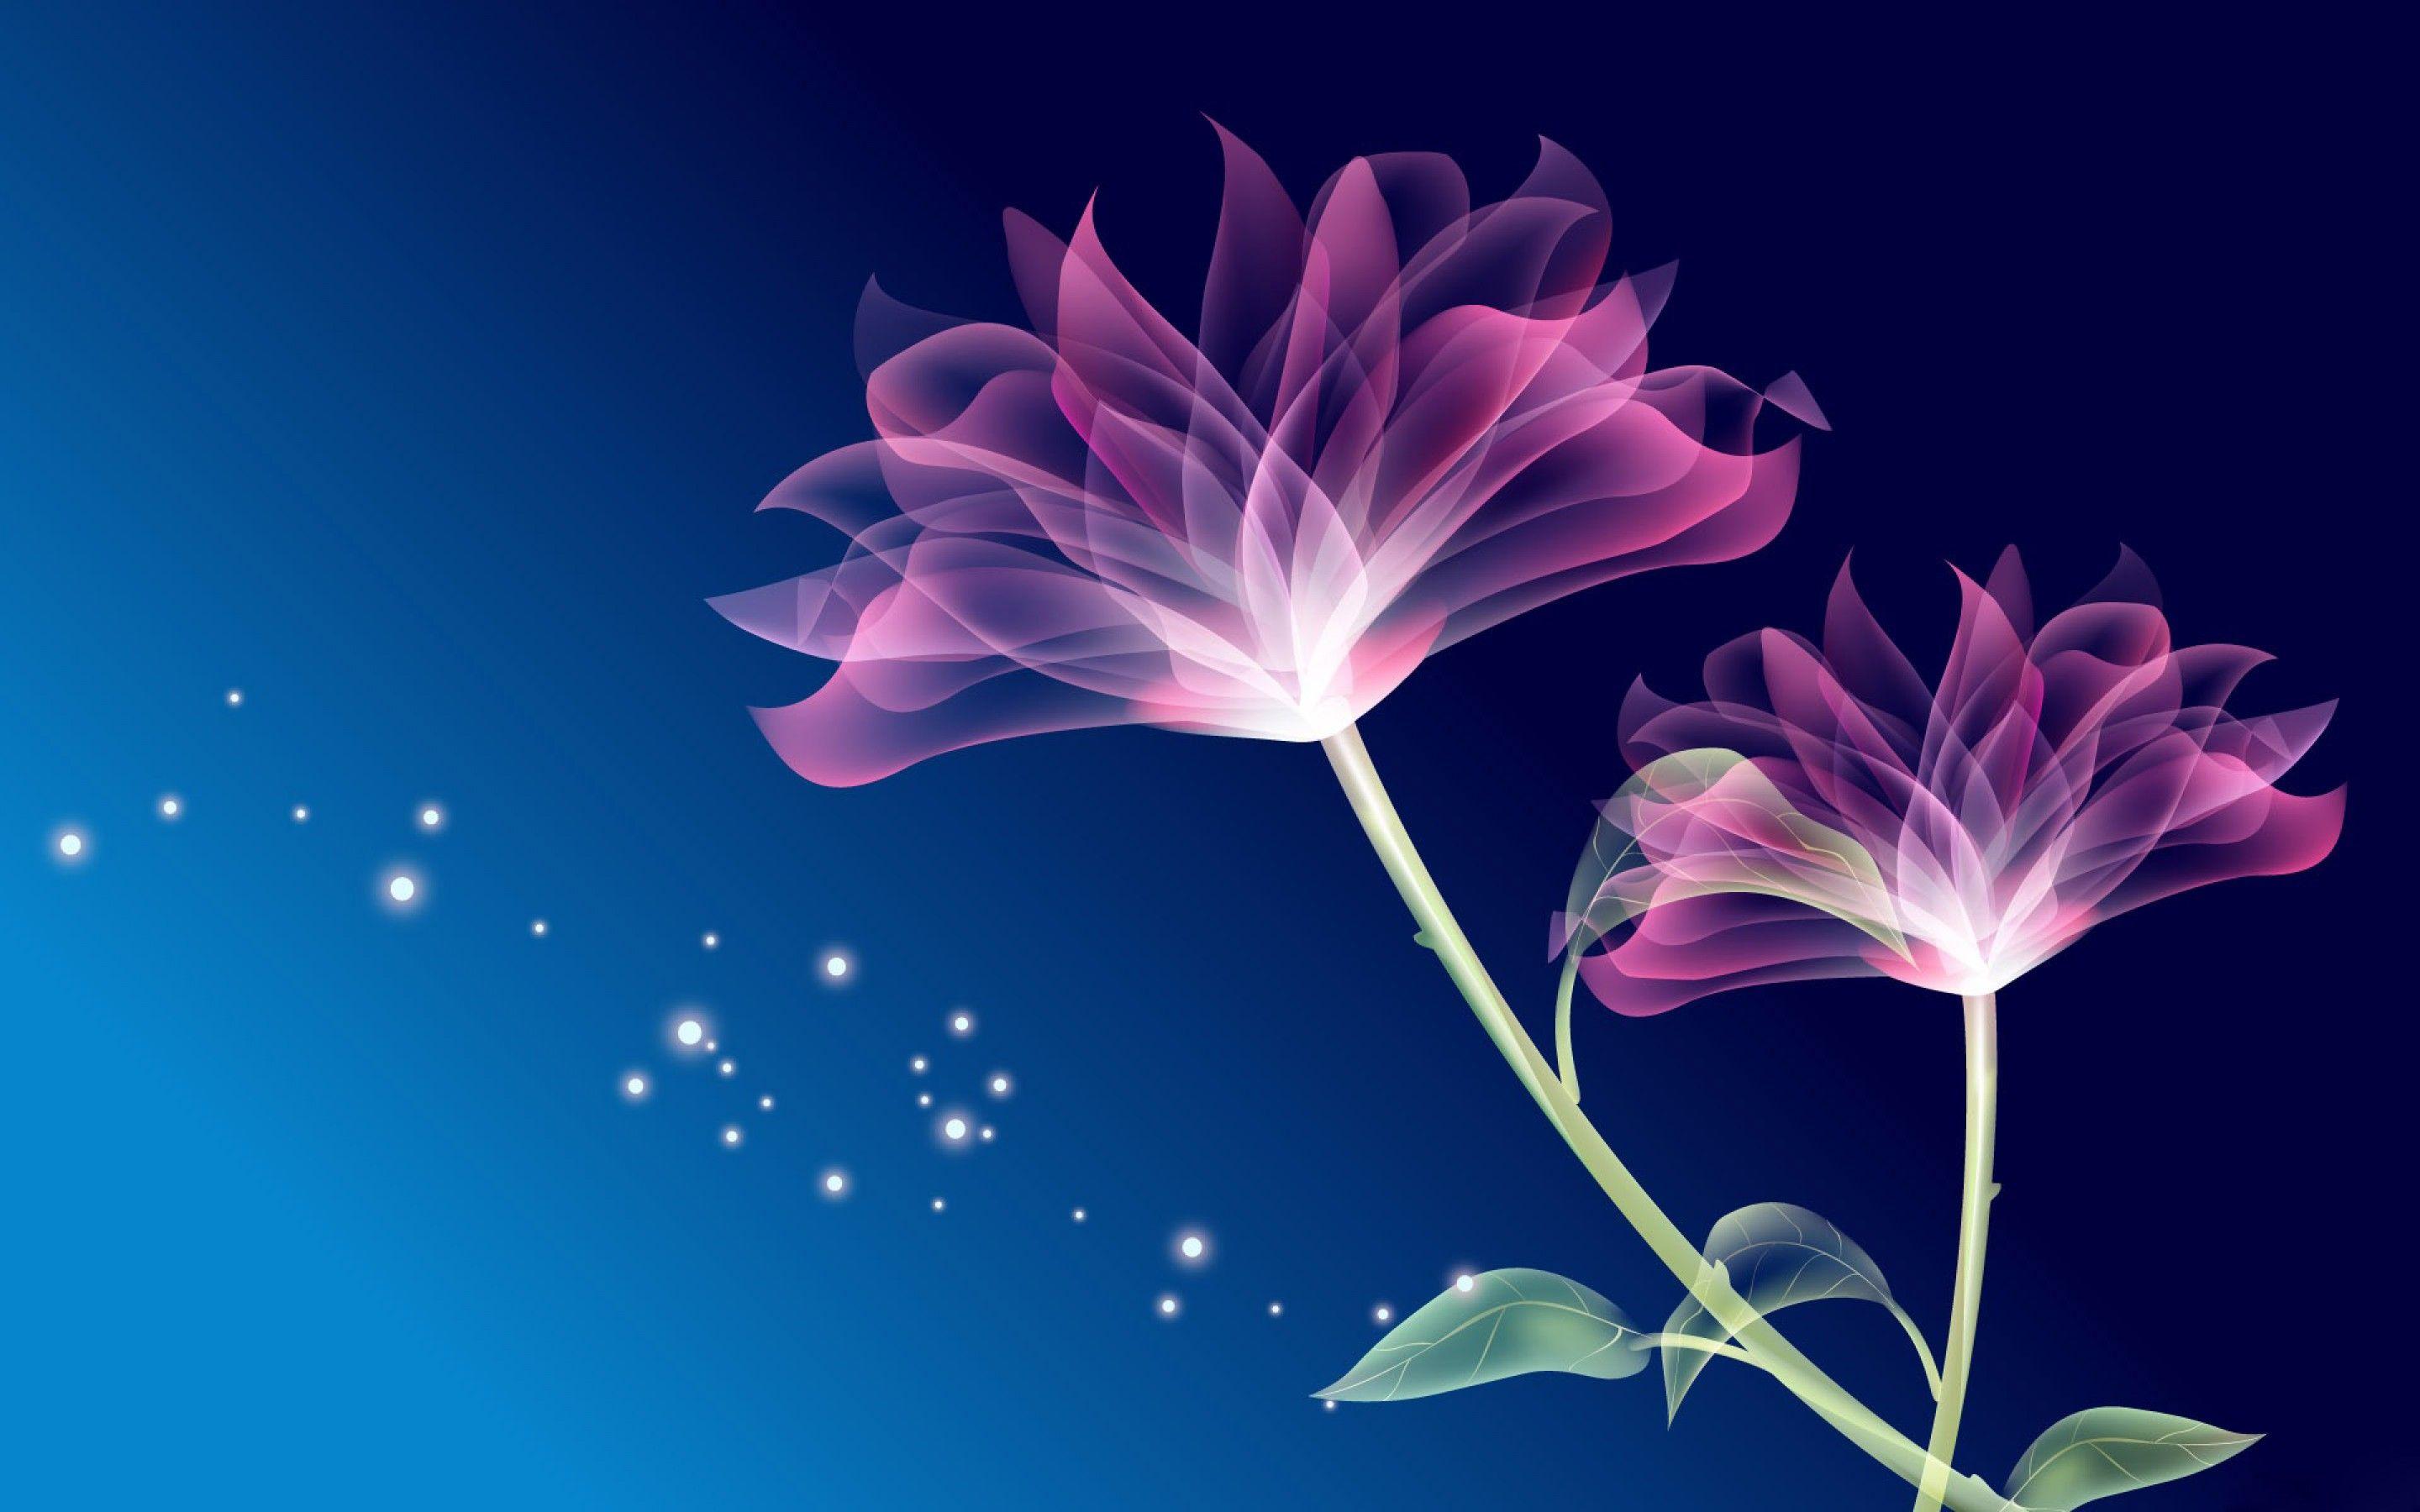 animated 3D abstract flowers wallpaper picture HD free download